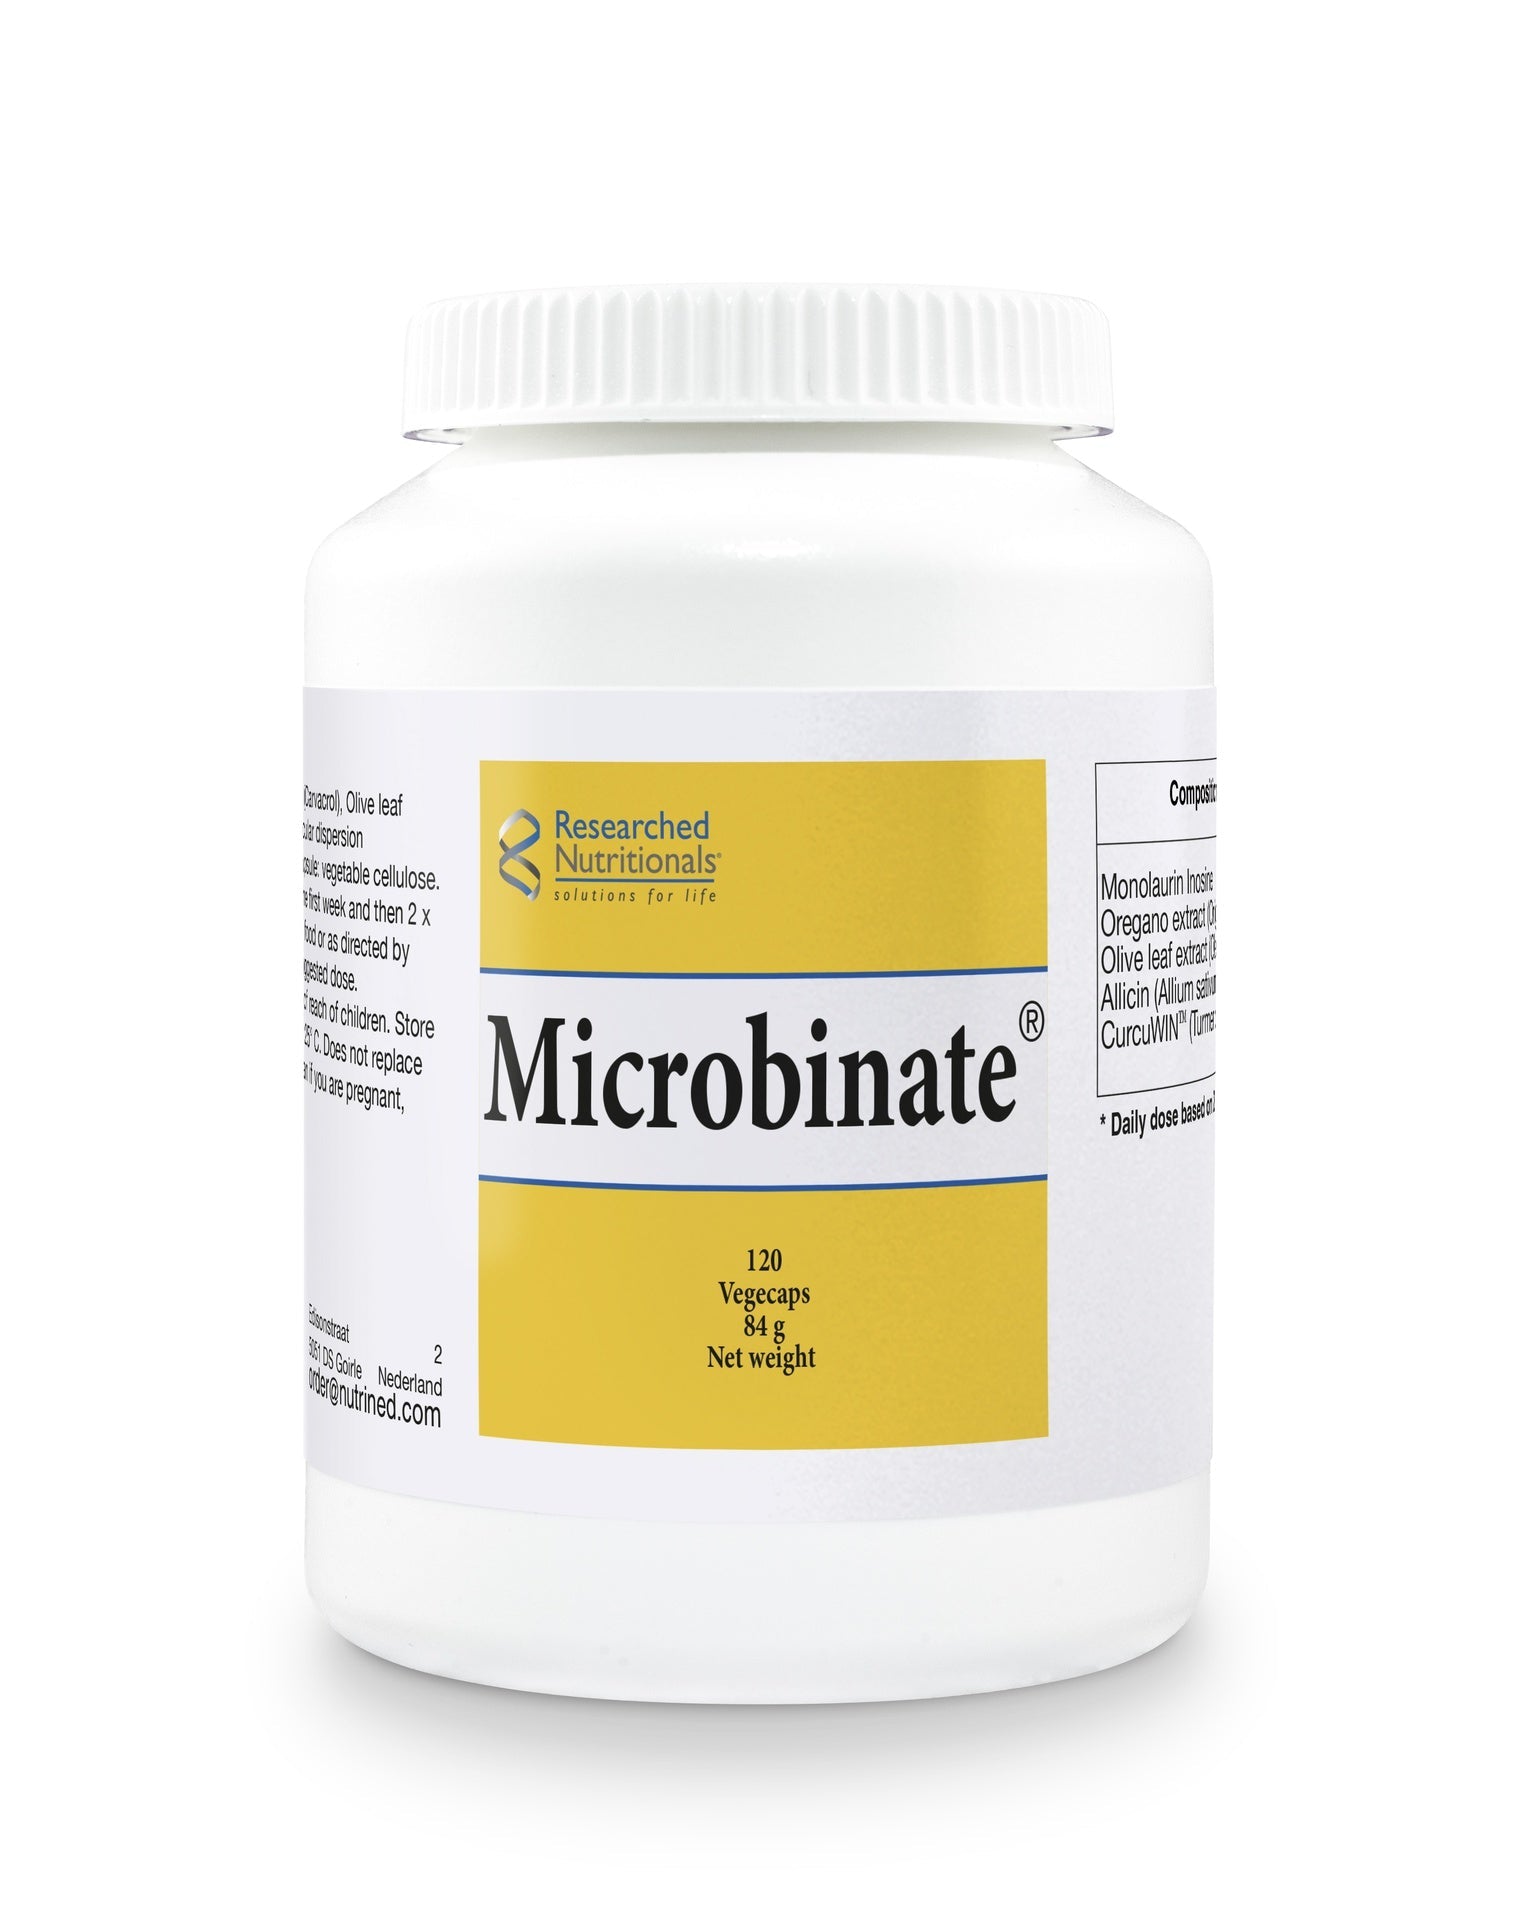 Microbinate - 120 Capsules | Researched Nutritionals